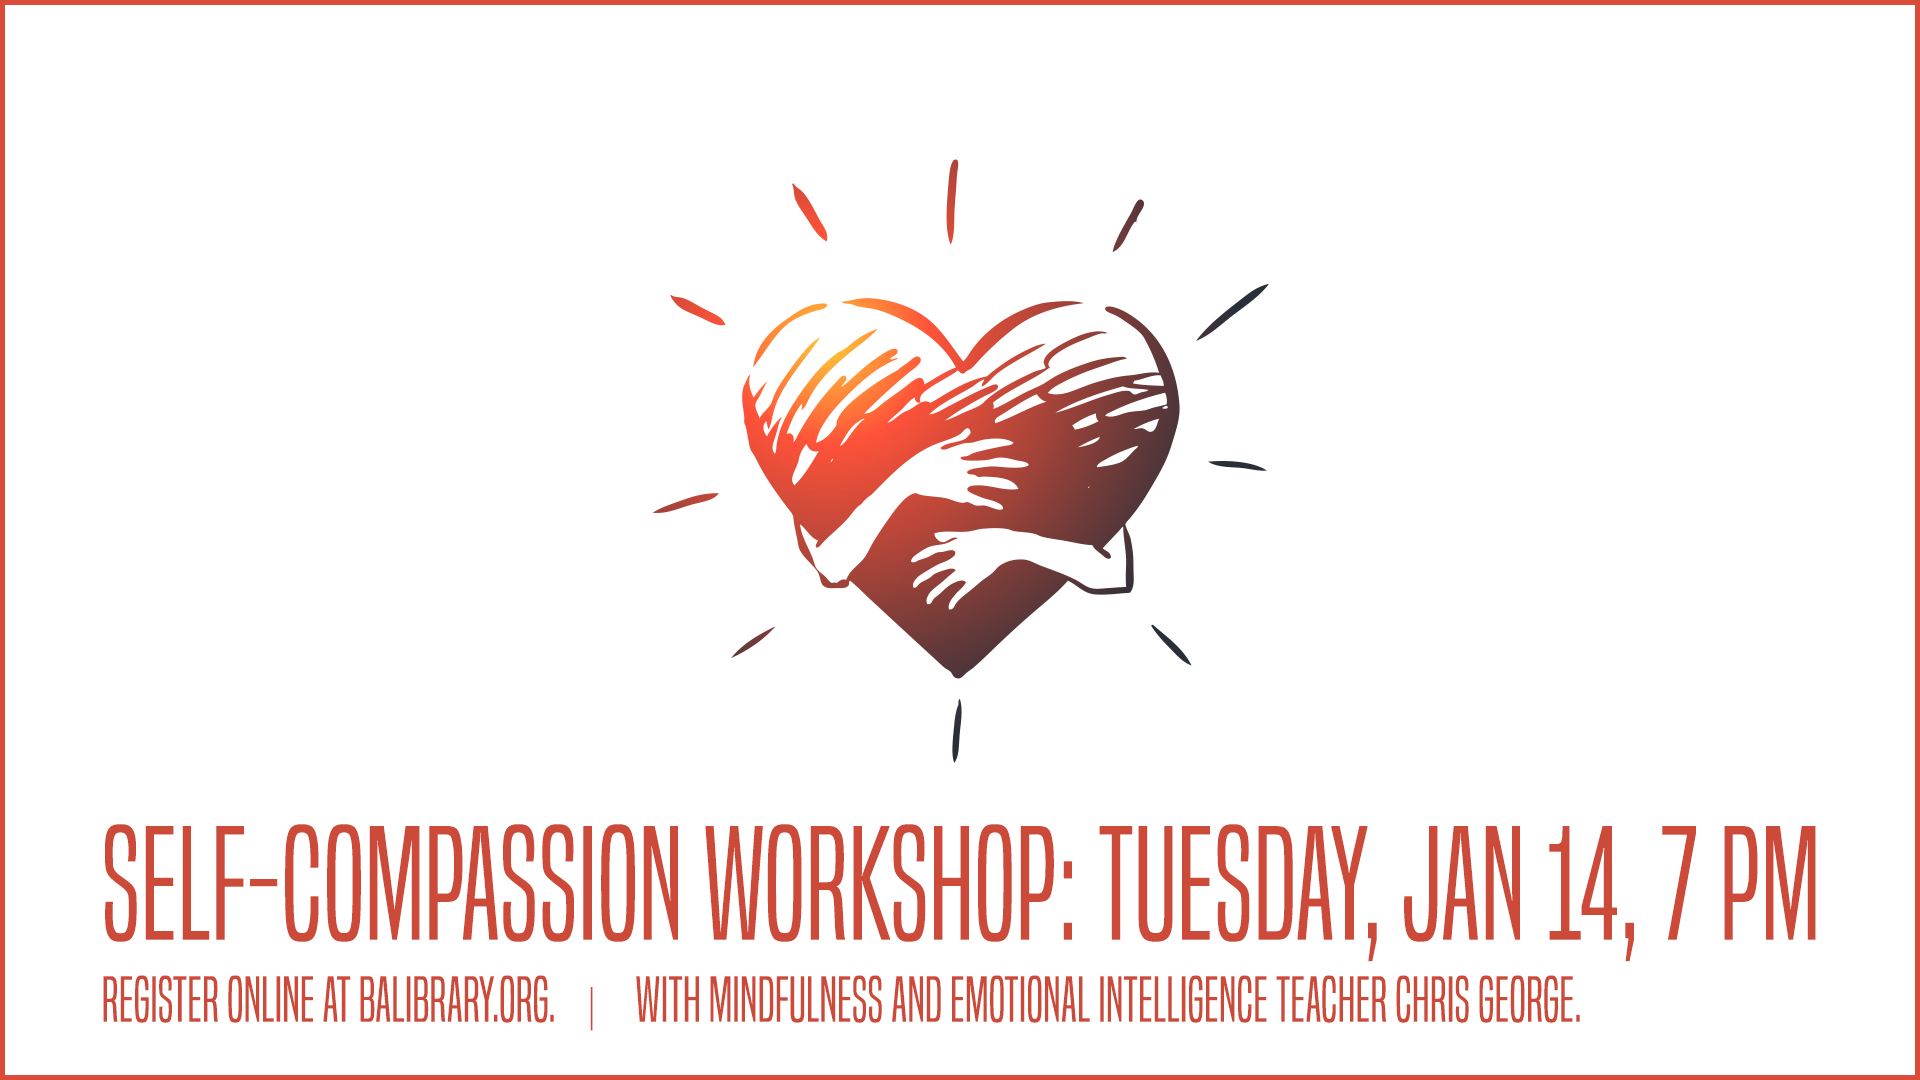 Heart with hands over it, hugging. Text reads Self-Compassion Workshop, Tuesday, Jan 14, 7 PM. Register online at BALIBRARY.org